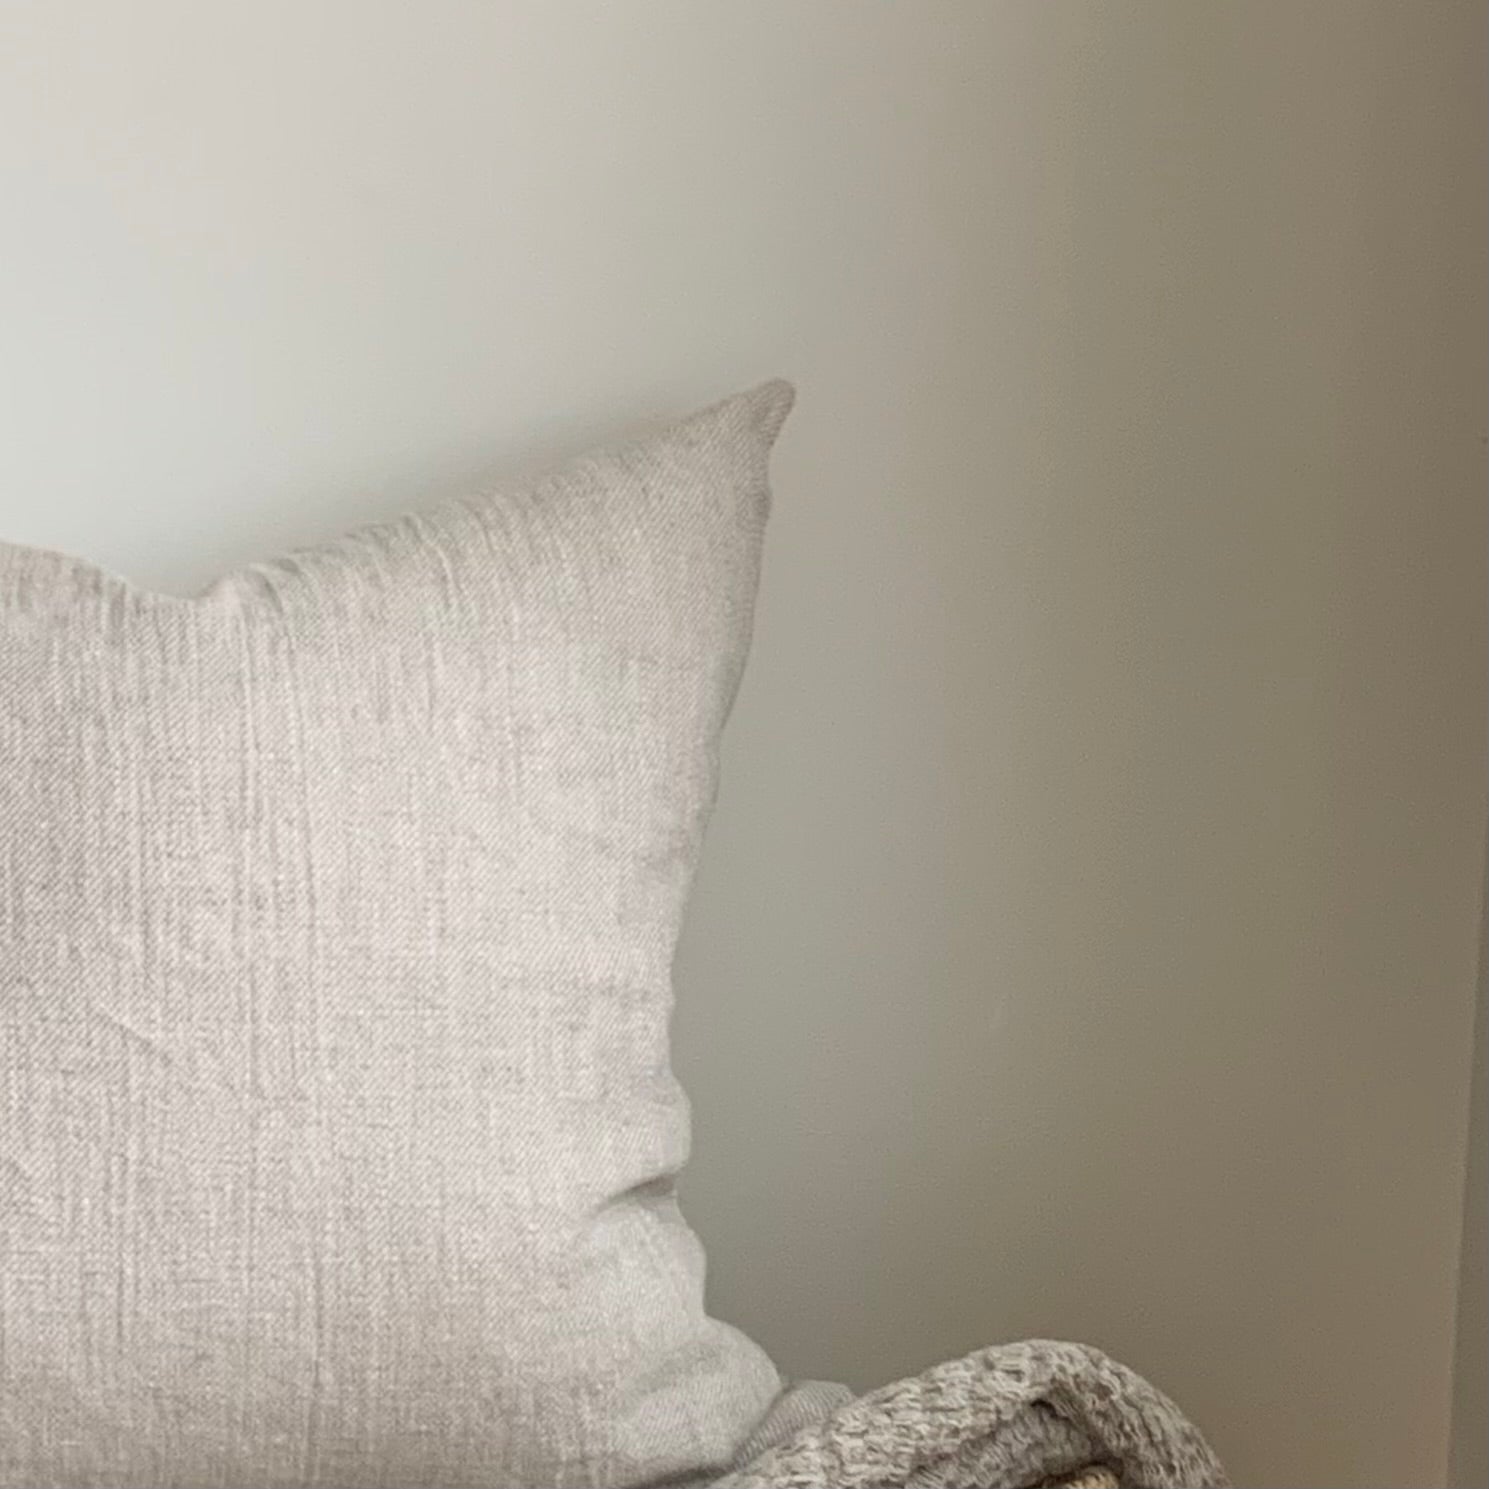 These beautiful 100% linen pillow covers are crafted from the finest Oeko-Tex® certified linen and feature an exposed contrasting zipper. Breathable, long lasting and biodegradable, linen is luxurious yet casual, it is a classic that works beautifully in any space.   These pillow covers are handmade in Canada.  Pillow cover only - insert not included.  Size: 18 x 18 inches